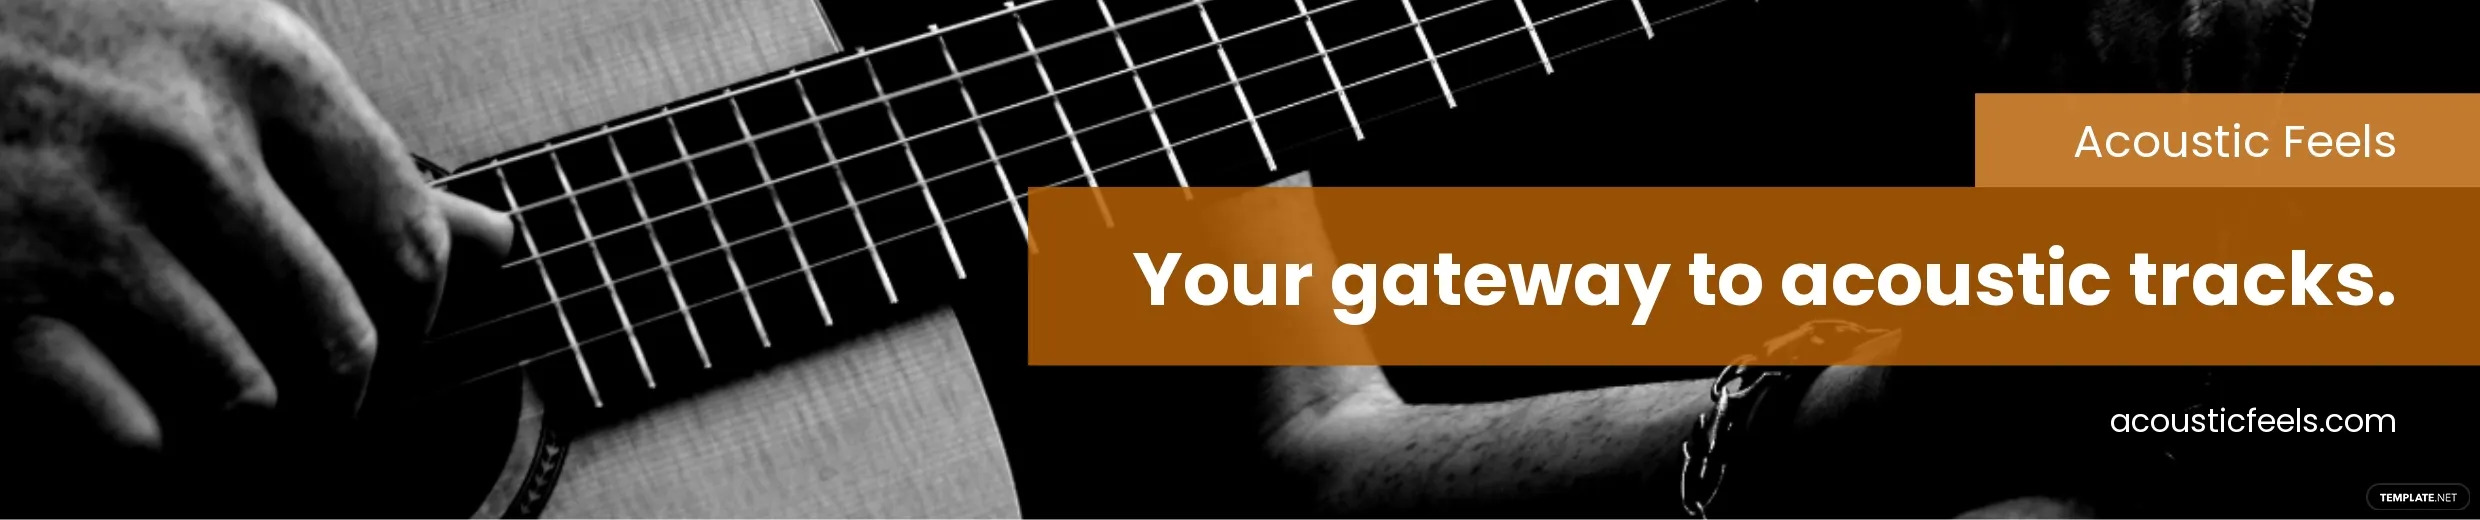 guitar music soundcloud banner ideas and examples